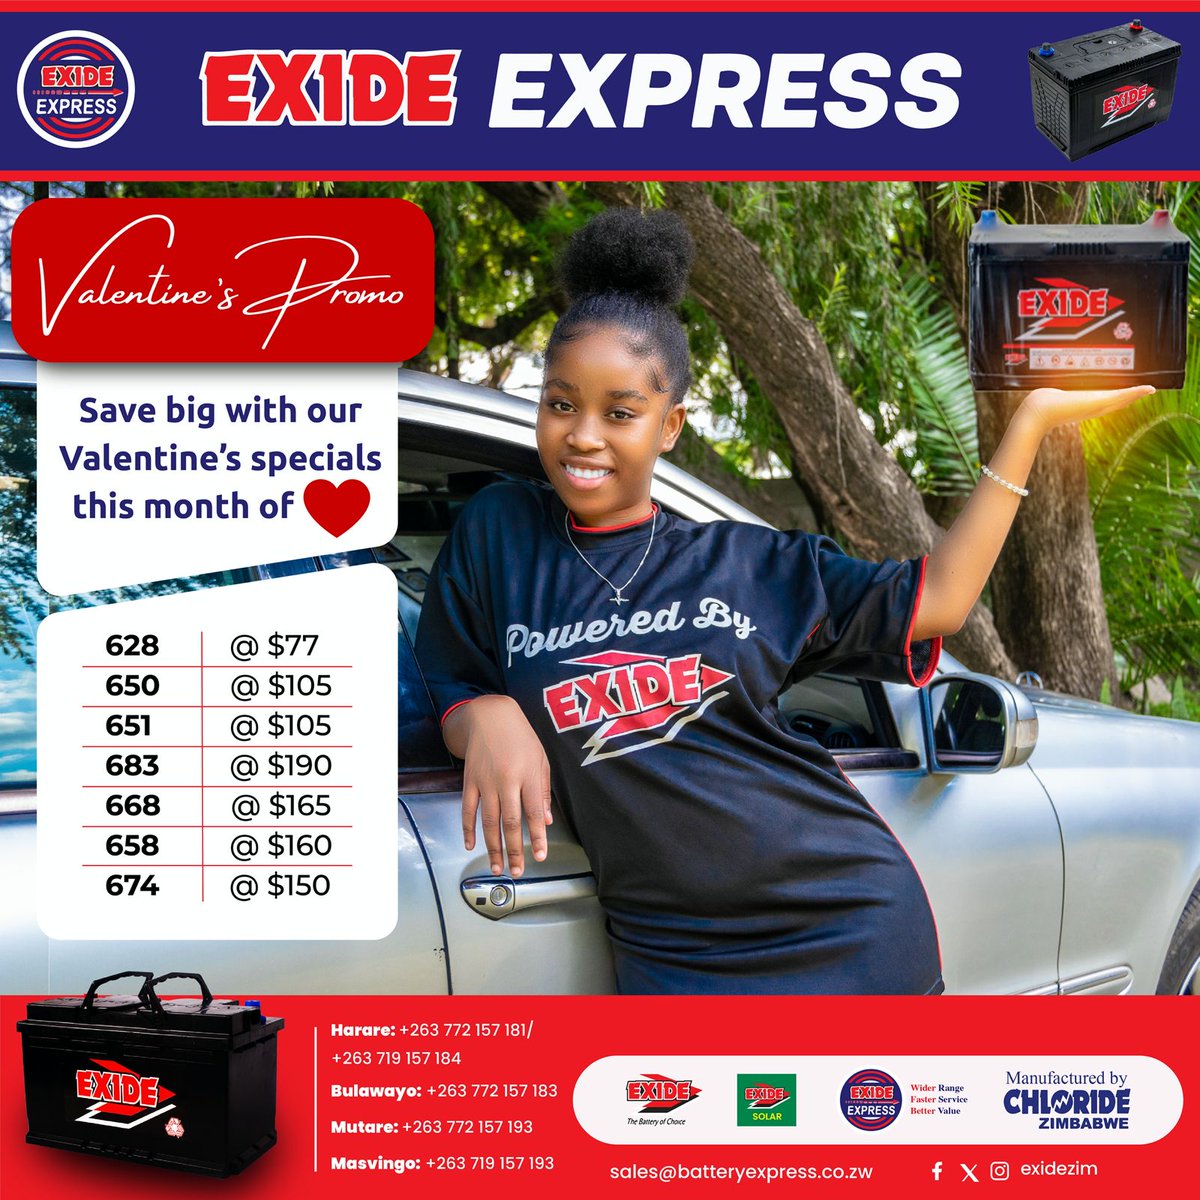 #valentinespecial❤️ Jumpstarting an old battery is outdated. Enjoy amazing specials on our Exide Batteries this month of love. Visit any Exide Express shop or approved dears. #thebatteryofchoice #valentinespromo @KUDZIELISTER2 @Mavhure @IdeasZaka @takemorem1 @EsteemComms